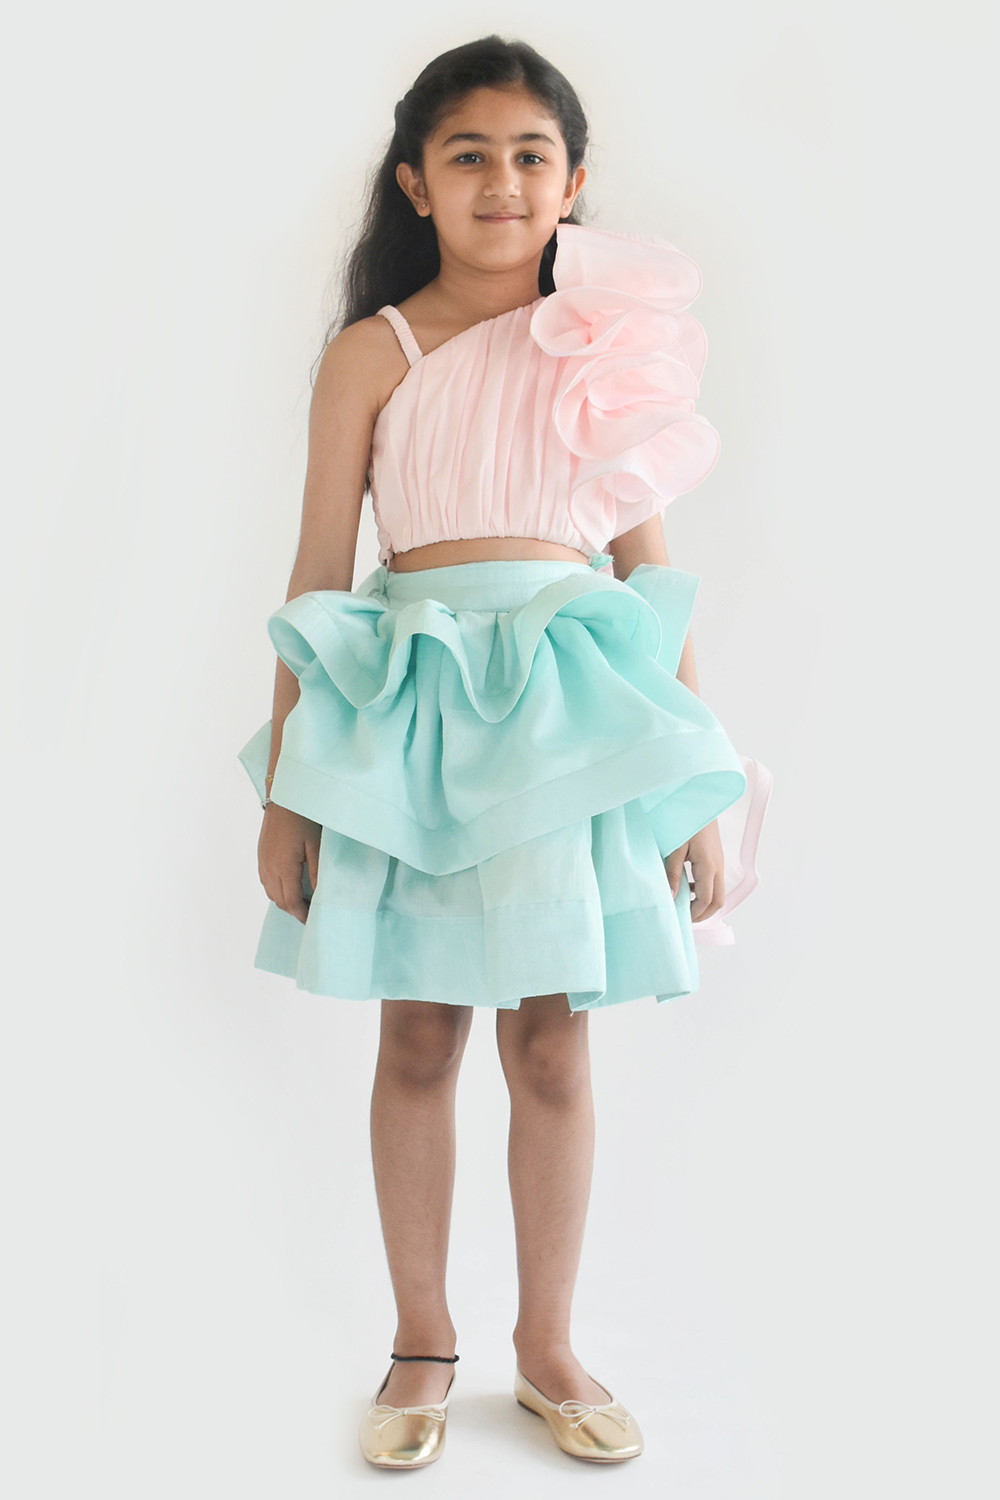 Pink Top and Aqua Blue Layers Skirt